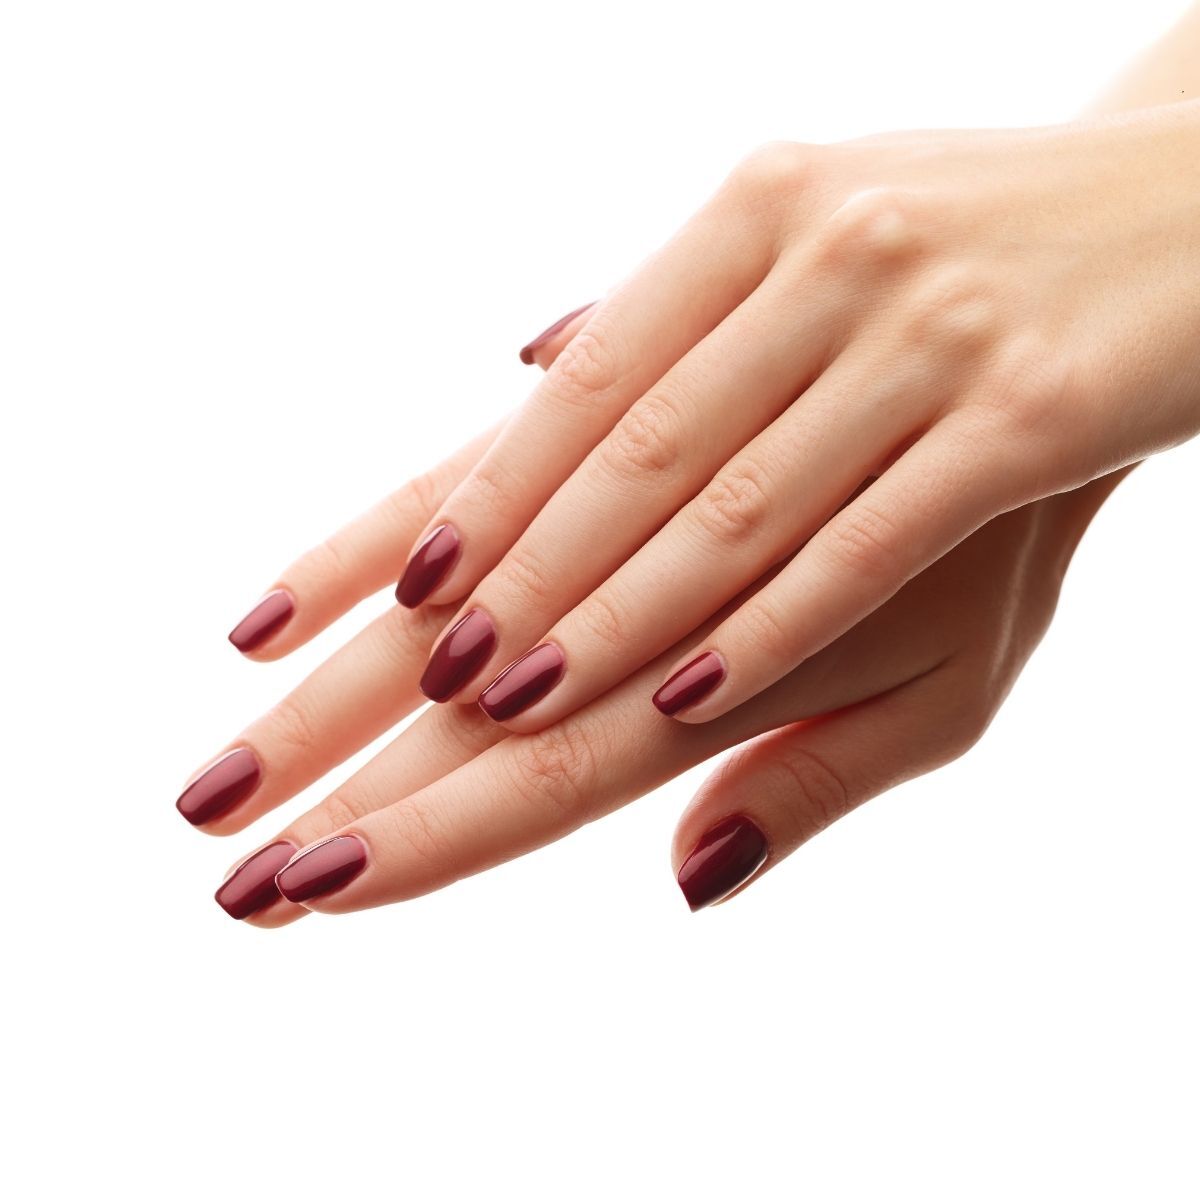 Model showing her hands with nail paint to showcase the nail paint color on a white background